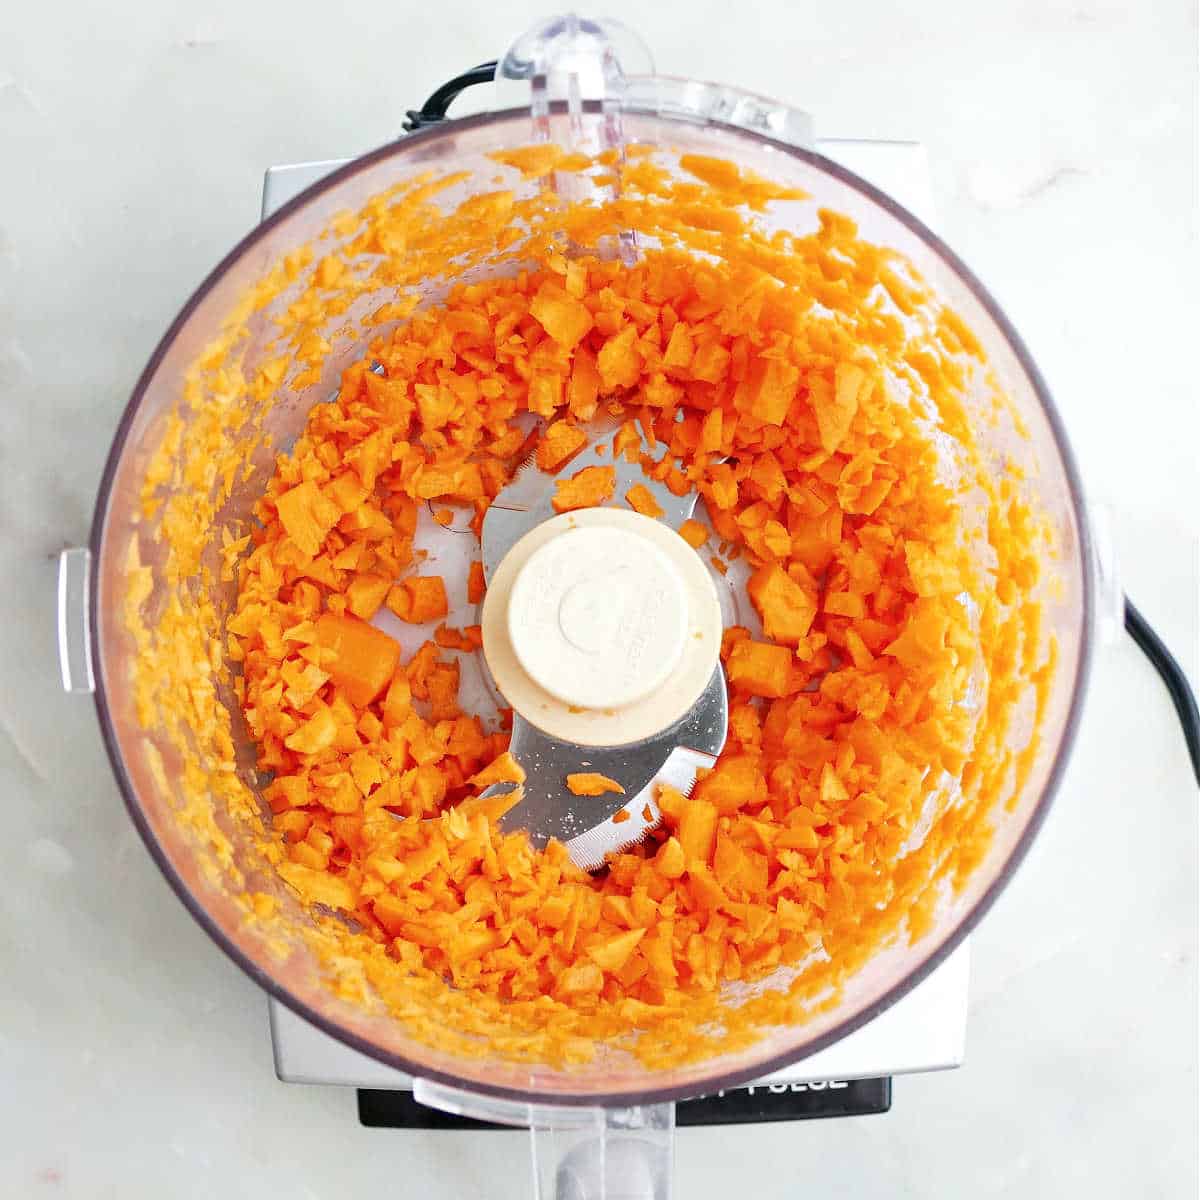 Pulsed carrots in a food processor.